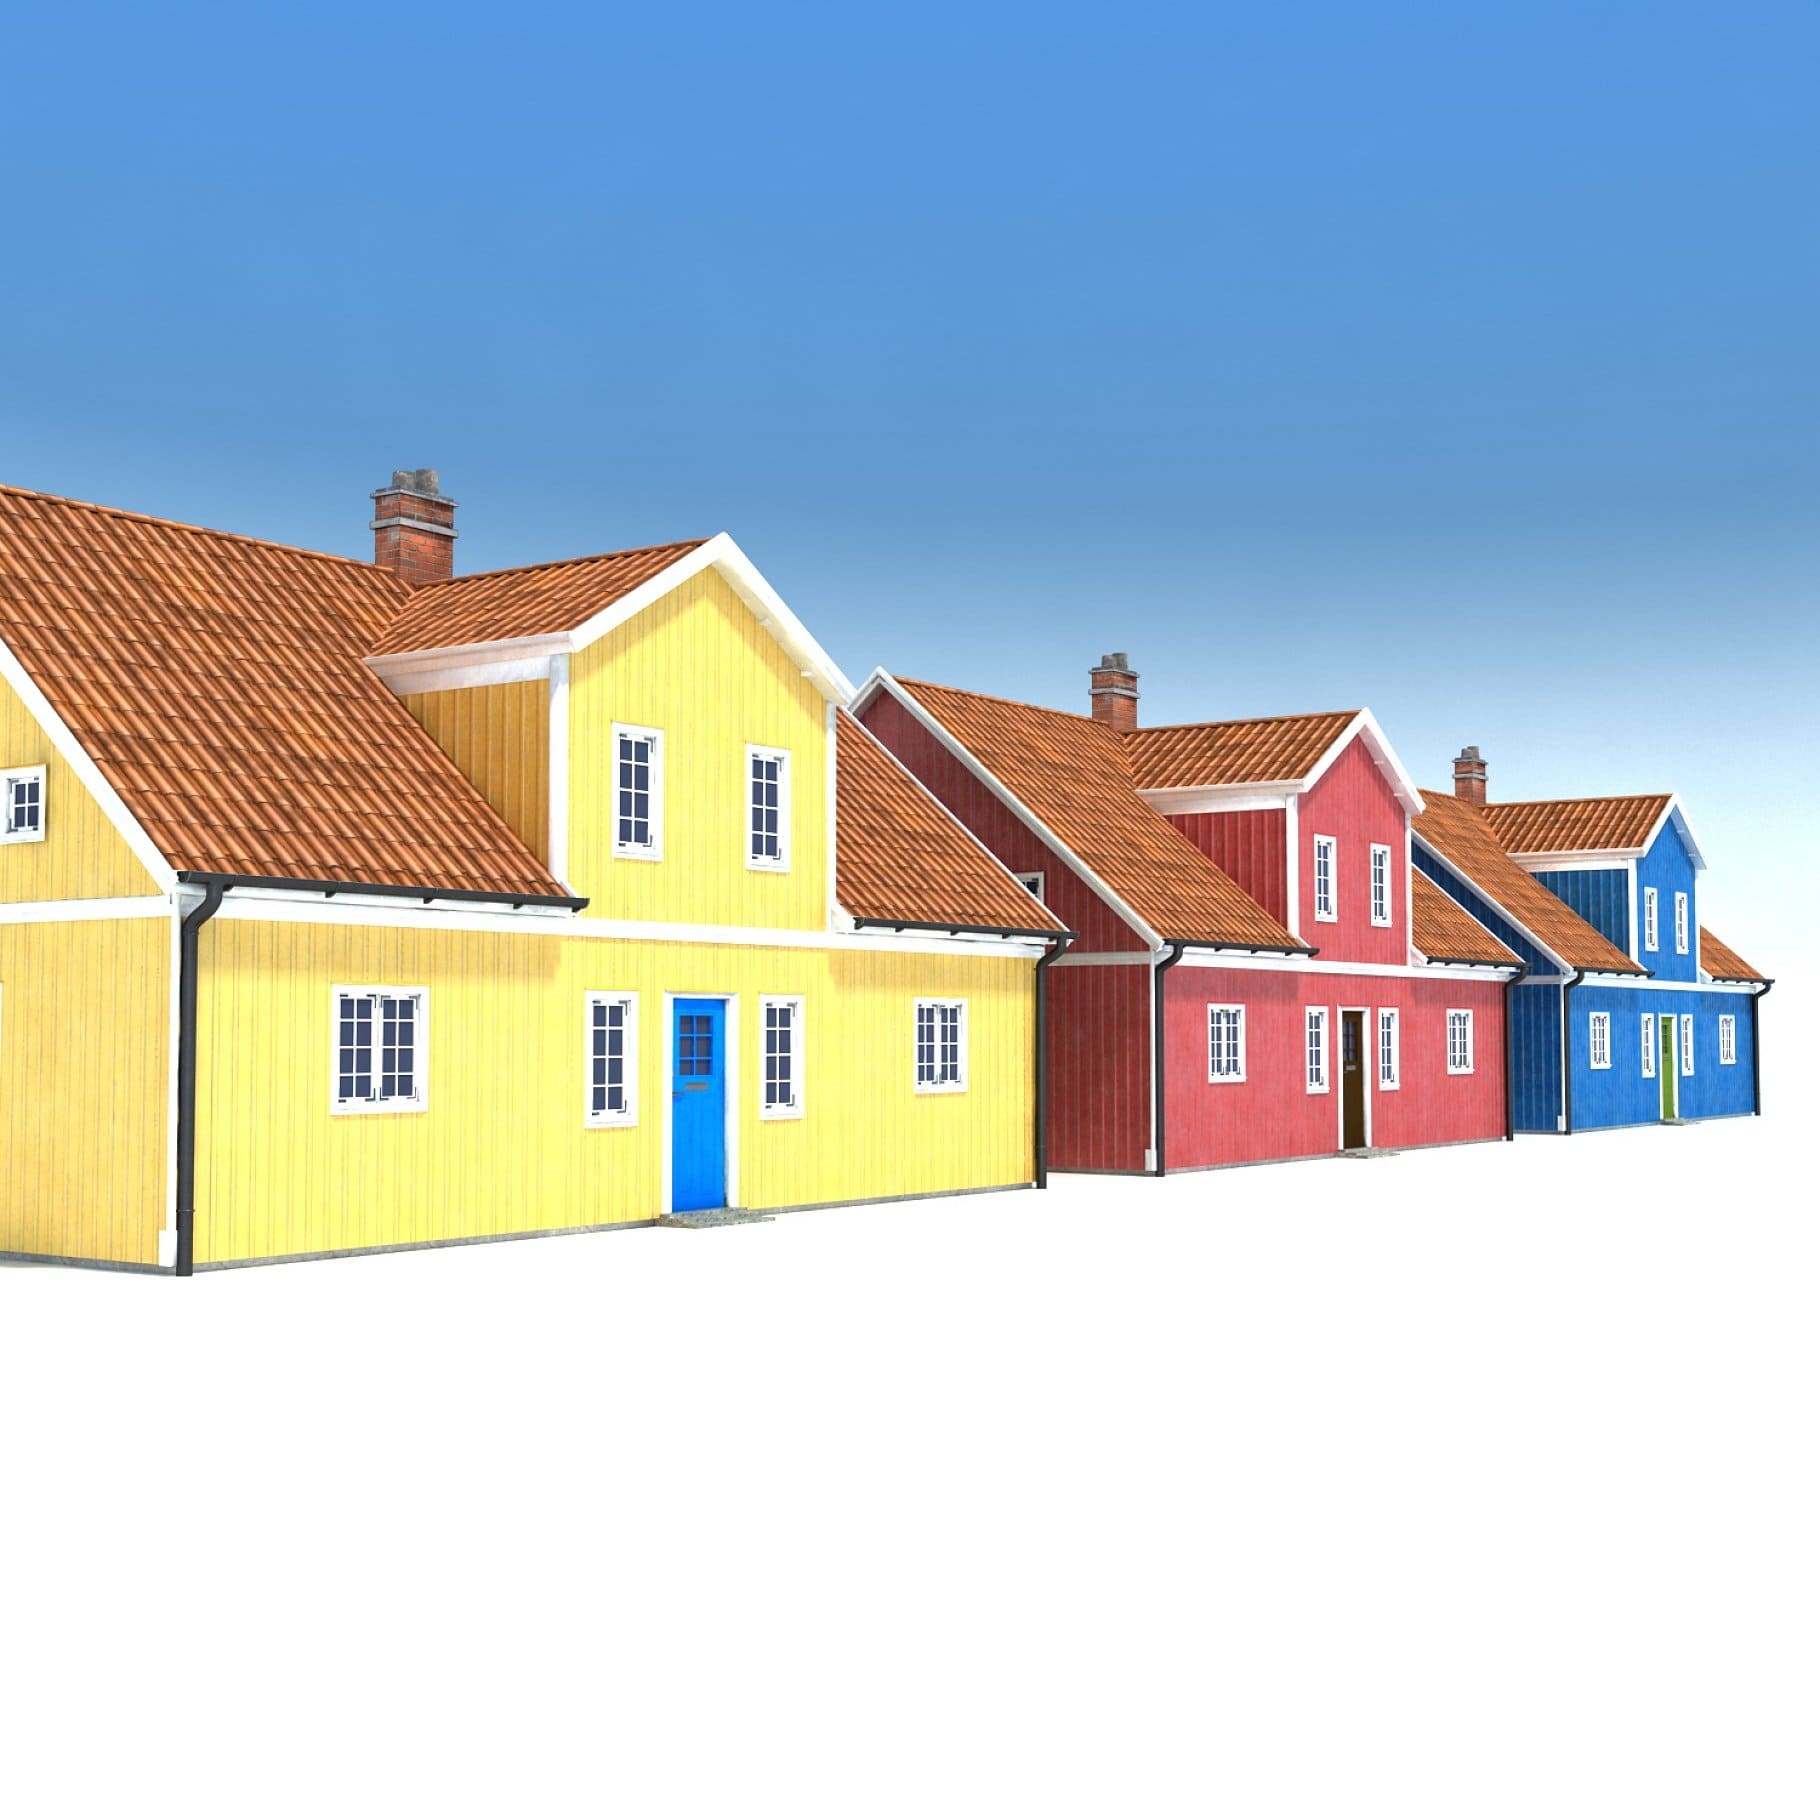 Three 3D models of houses with chimneys.